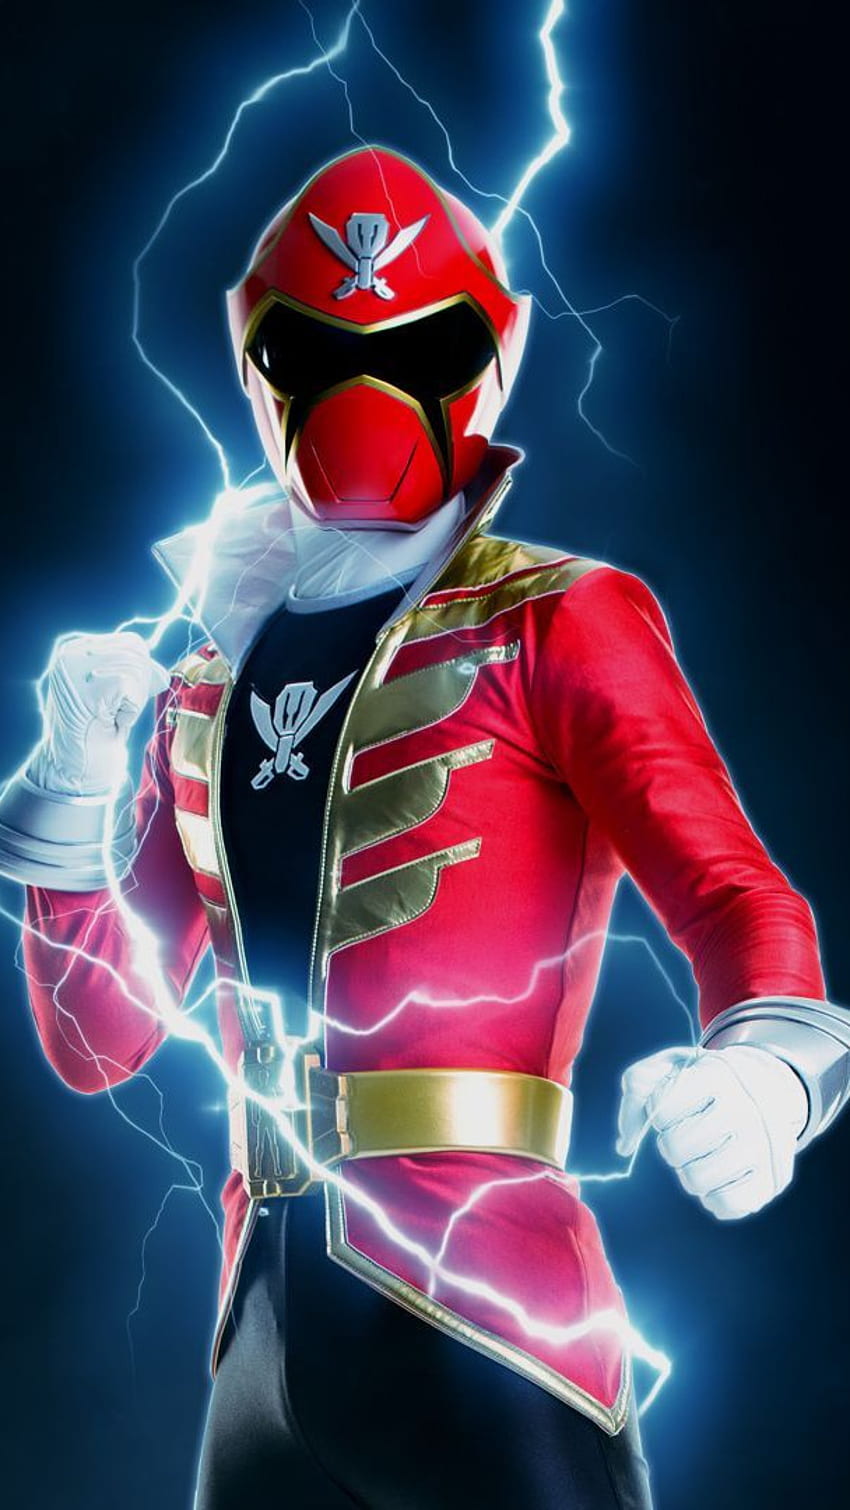 There used to be a Power Ranger show aired on Cartoon Network. It was  probably Japanese/Korean English Dubbed. Three particular Rangers-Red,  Blue, Black. Their power elements were Fire, Wind & Thunder.Can anyone